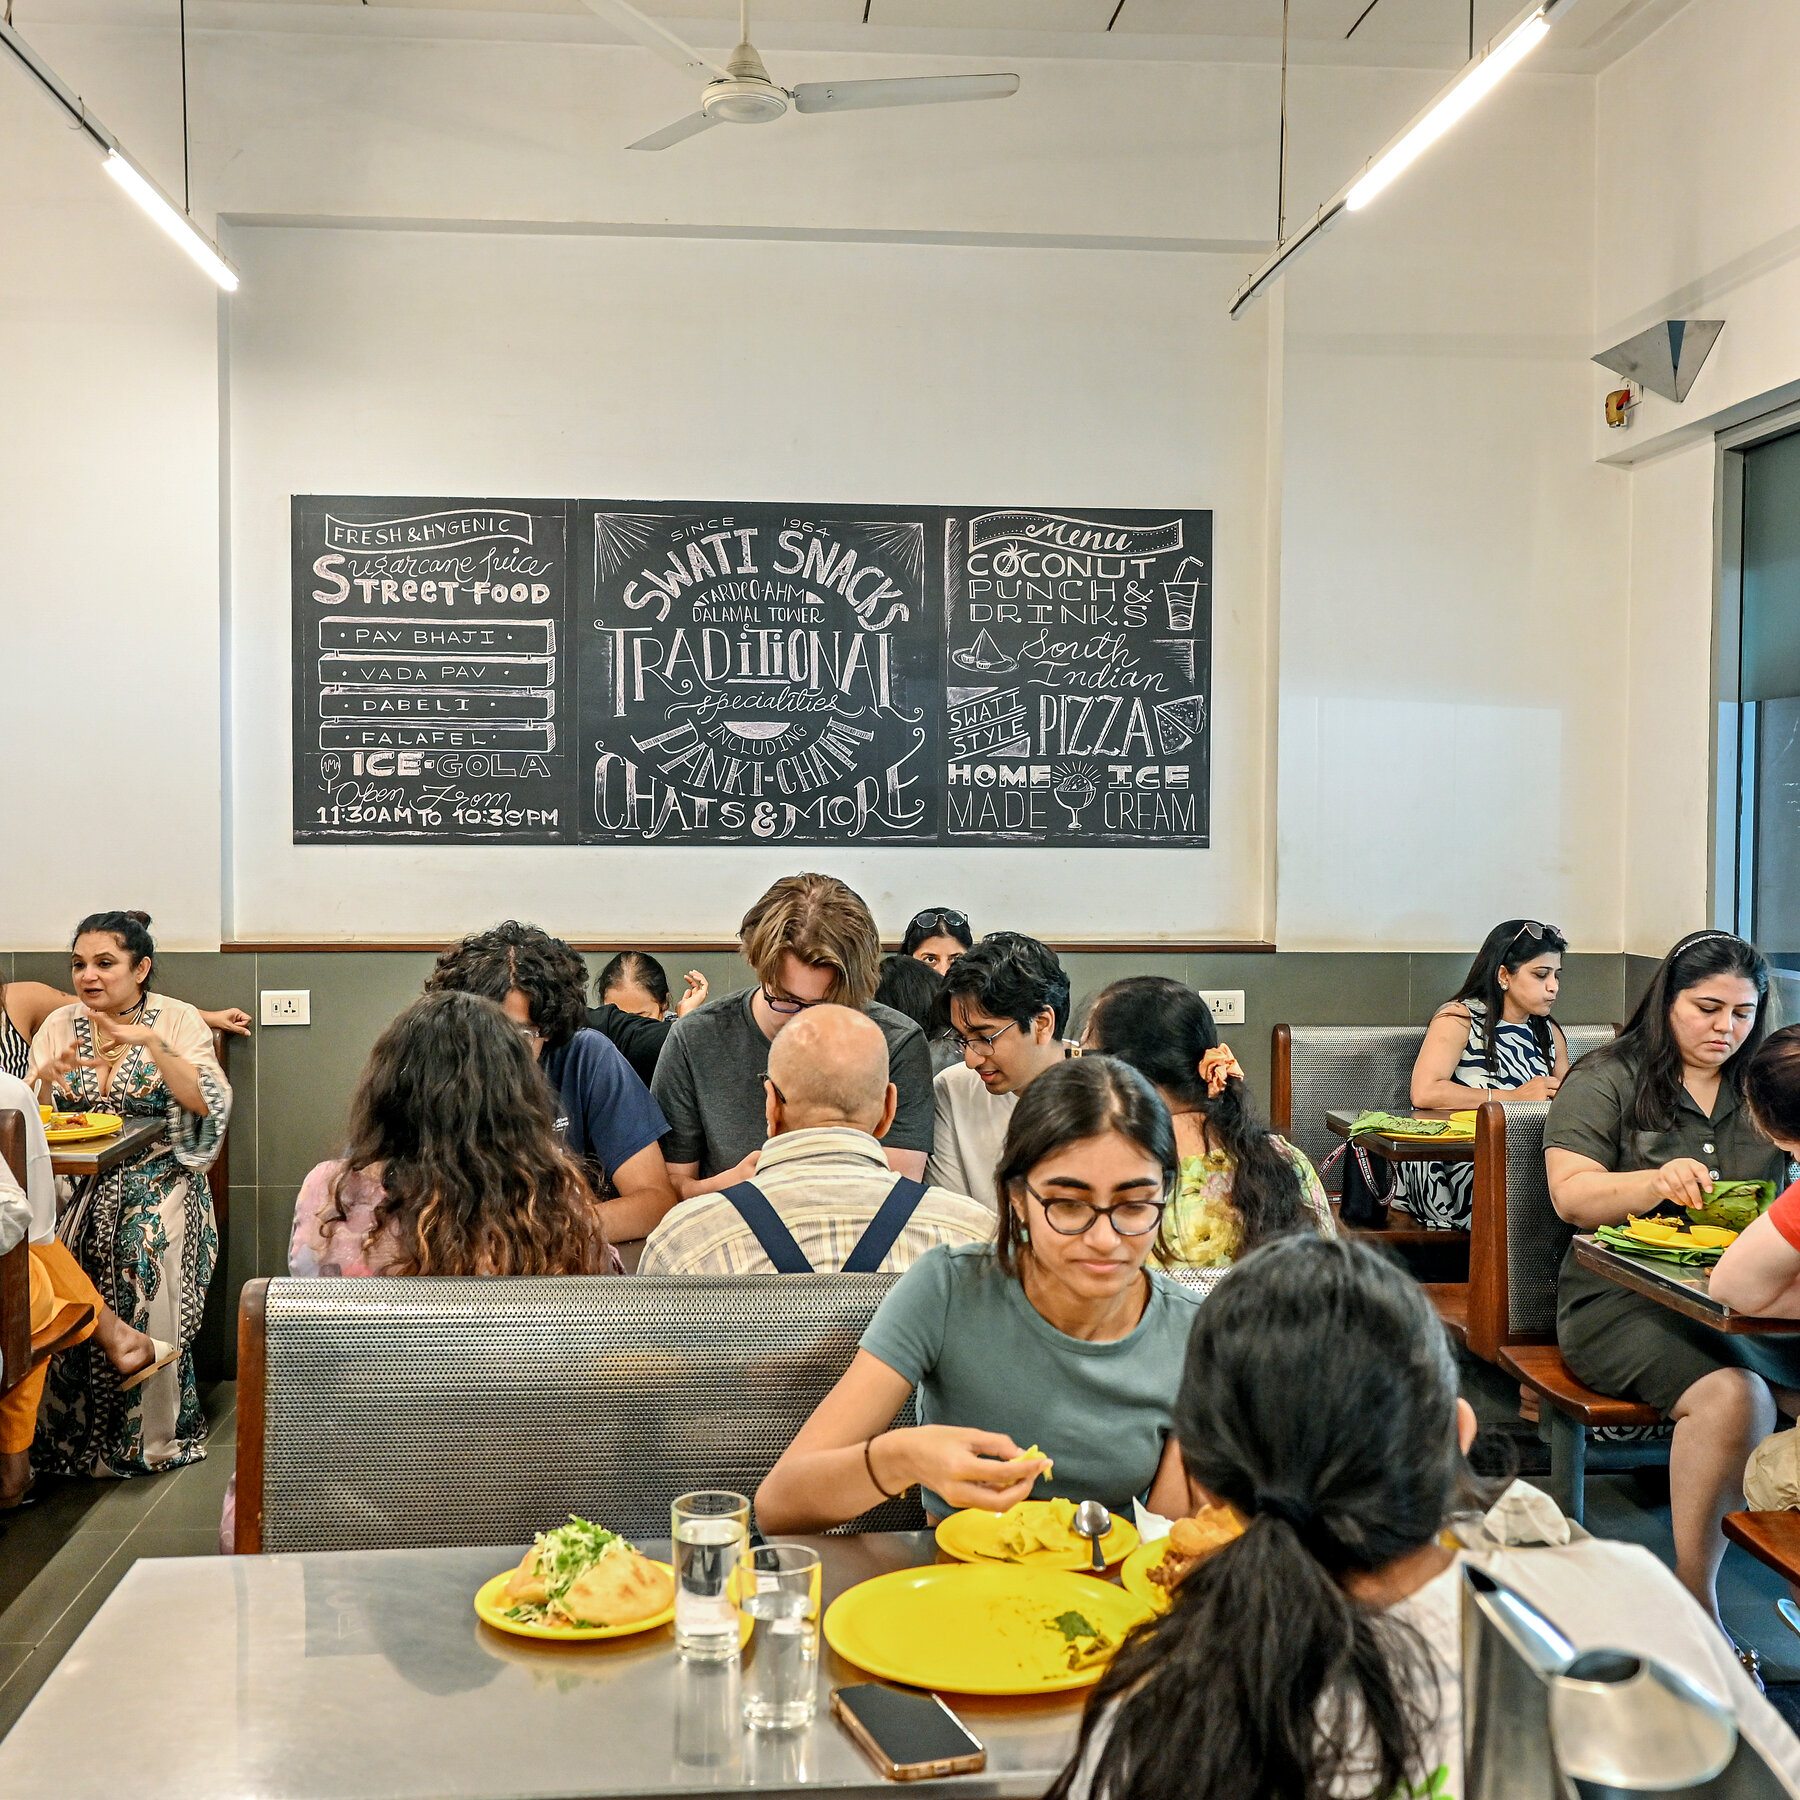 People eat from bright-yellow plates in a sparsely decorated restaurant with diner-like seating and metallic table tops. A chalkboard on the wall lists menu items and says the name of the restaurant, "Swati Snacks."